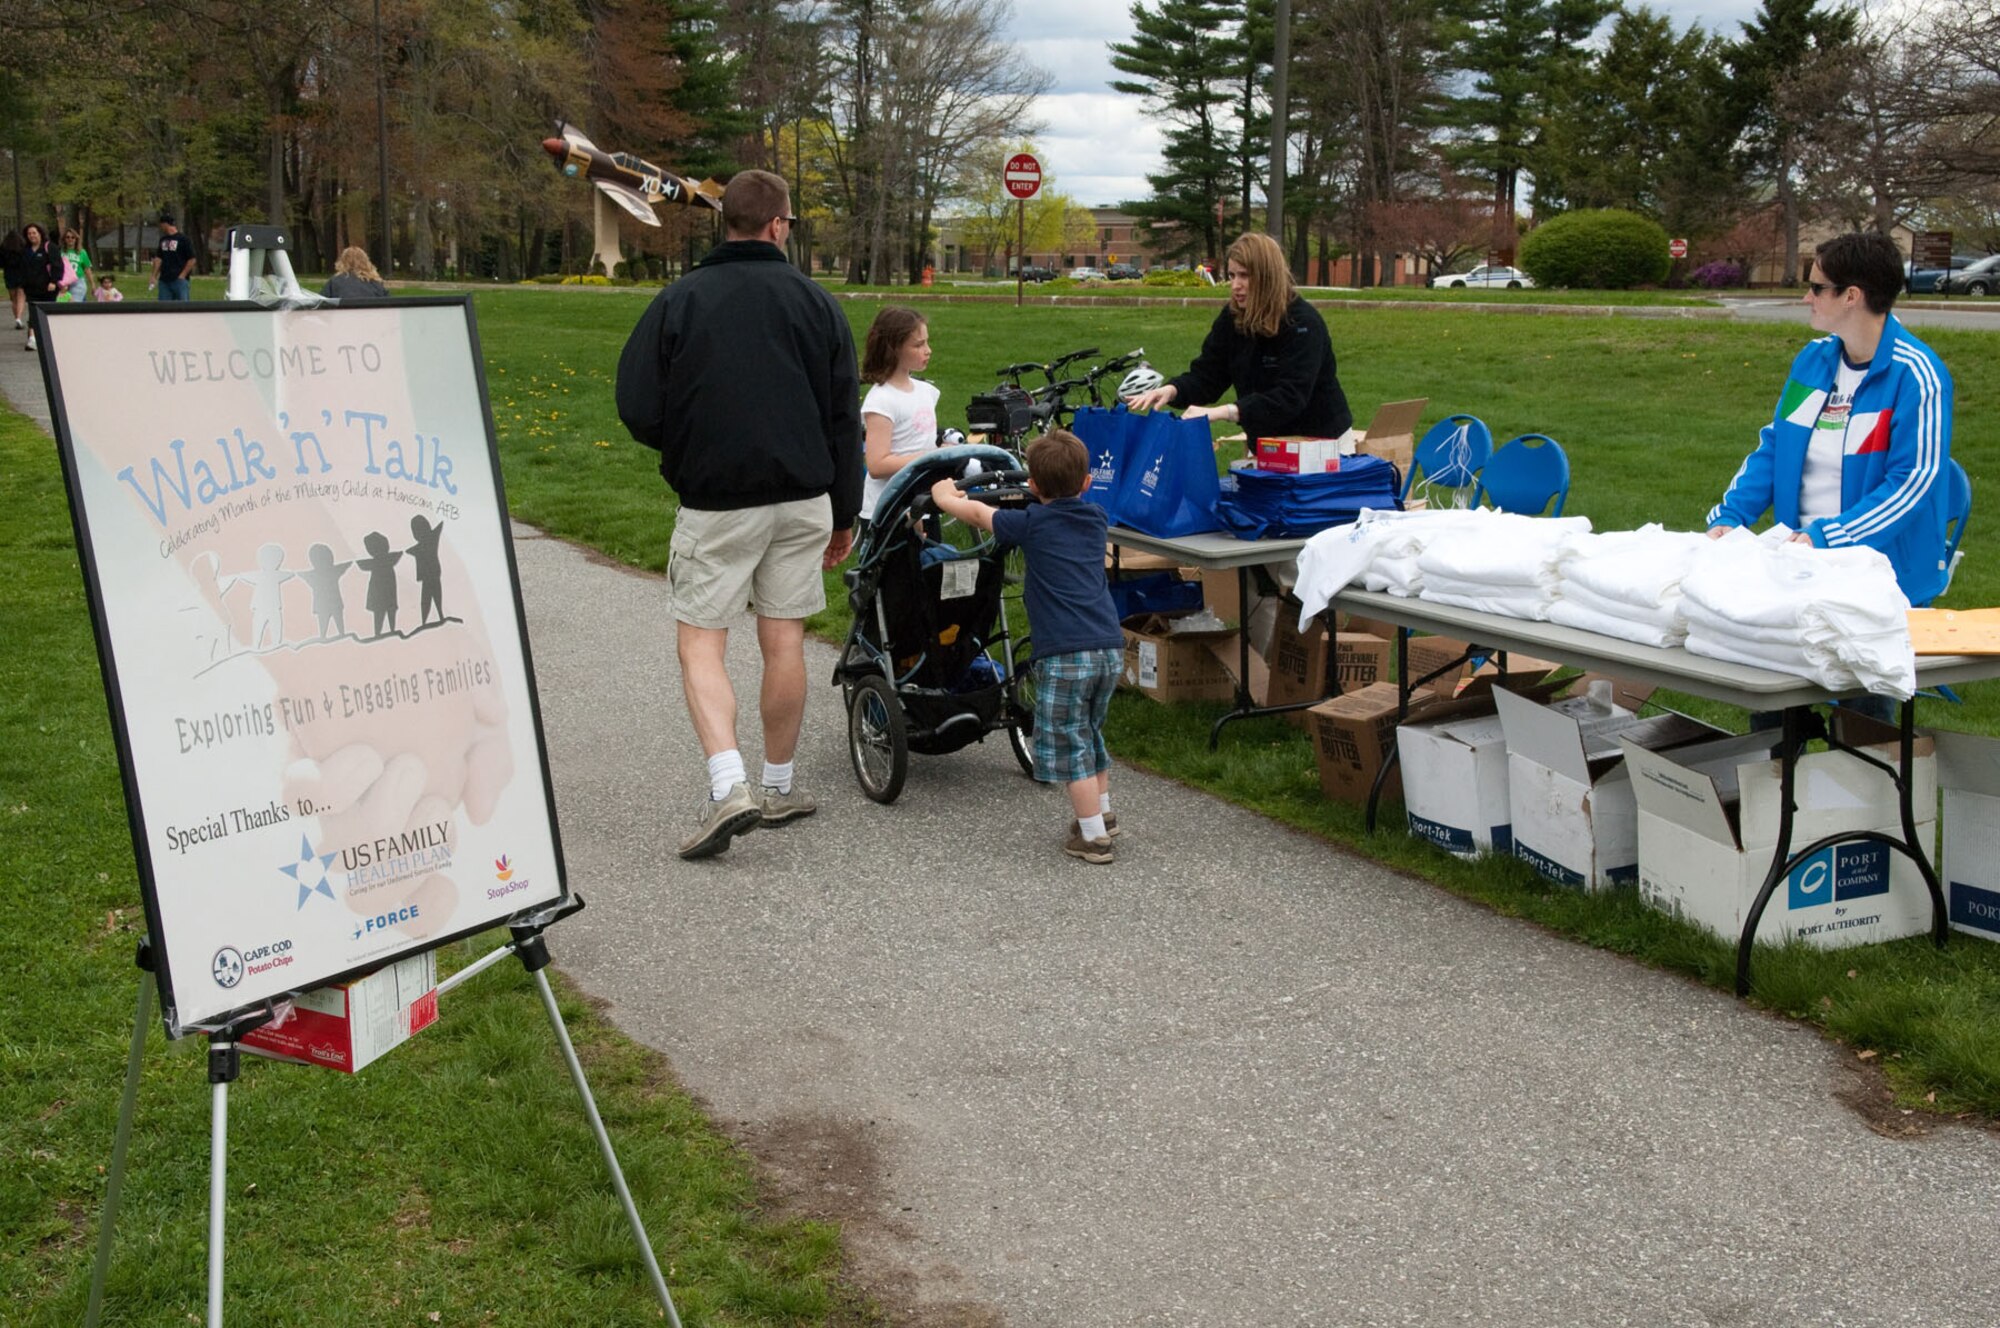 HANSCOM AIR FORCE BASE, Mass. – A family picks up T-shirts and bags at the beginning at Walk n Talk at Castle Park April 30. Hanscom families were invited to walk around Castle Park, learn about base and community services and talk about important family issues. (U.S. Air Force photo by Rick Berry)